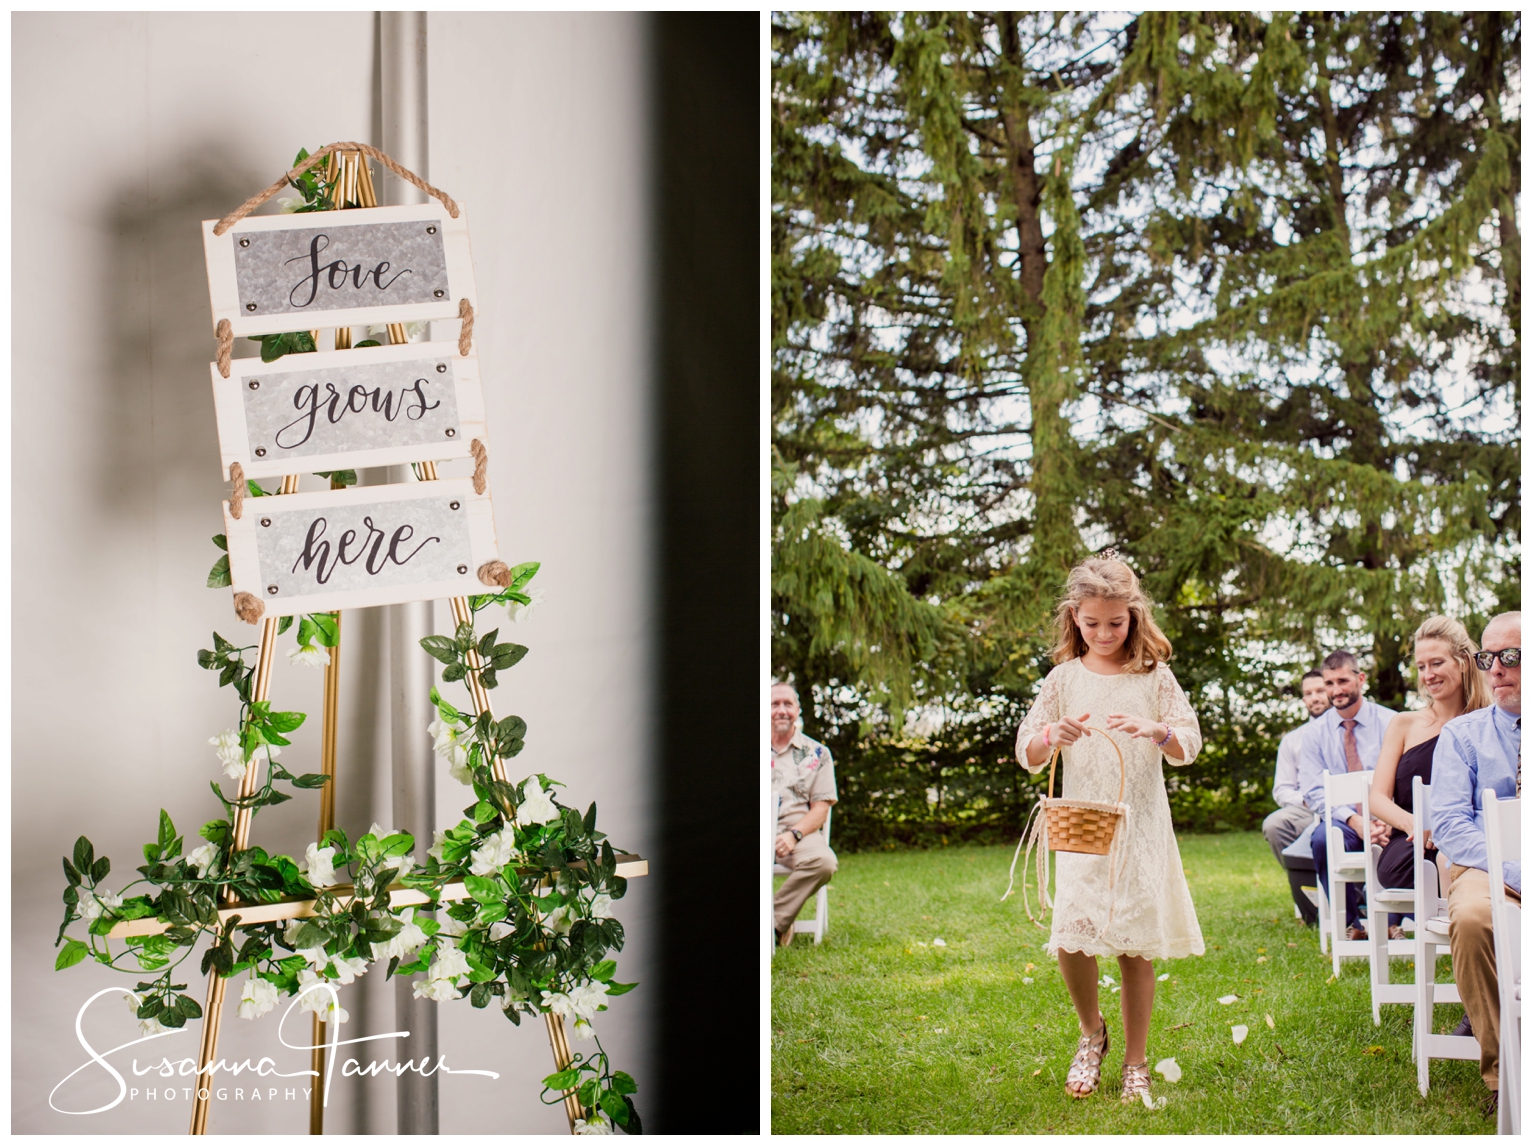 Indianapolis Outdoor Wedding, "Love Grows Here" sign, flower girl walking down aisle